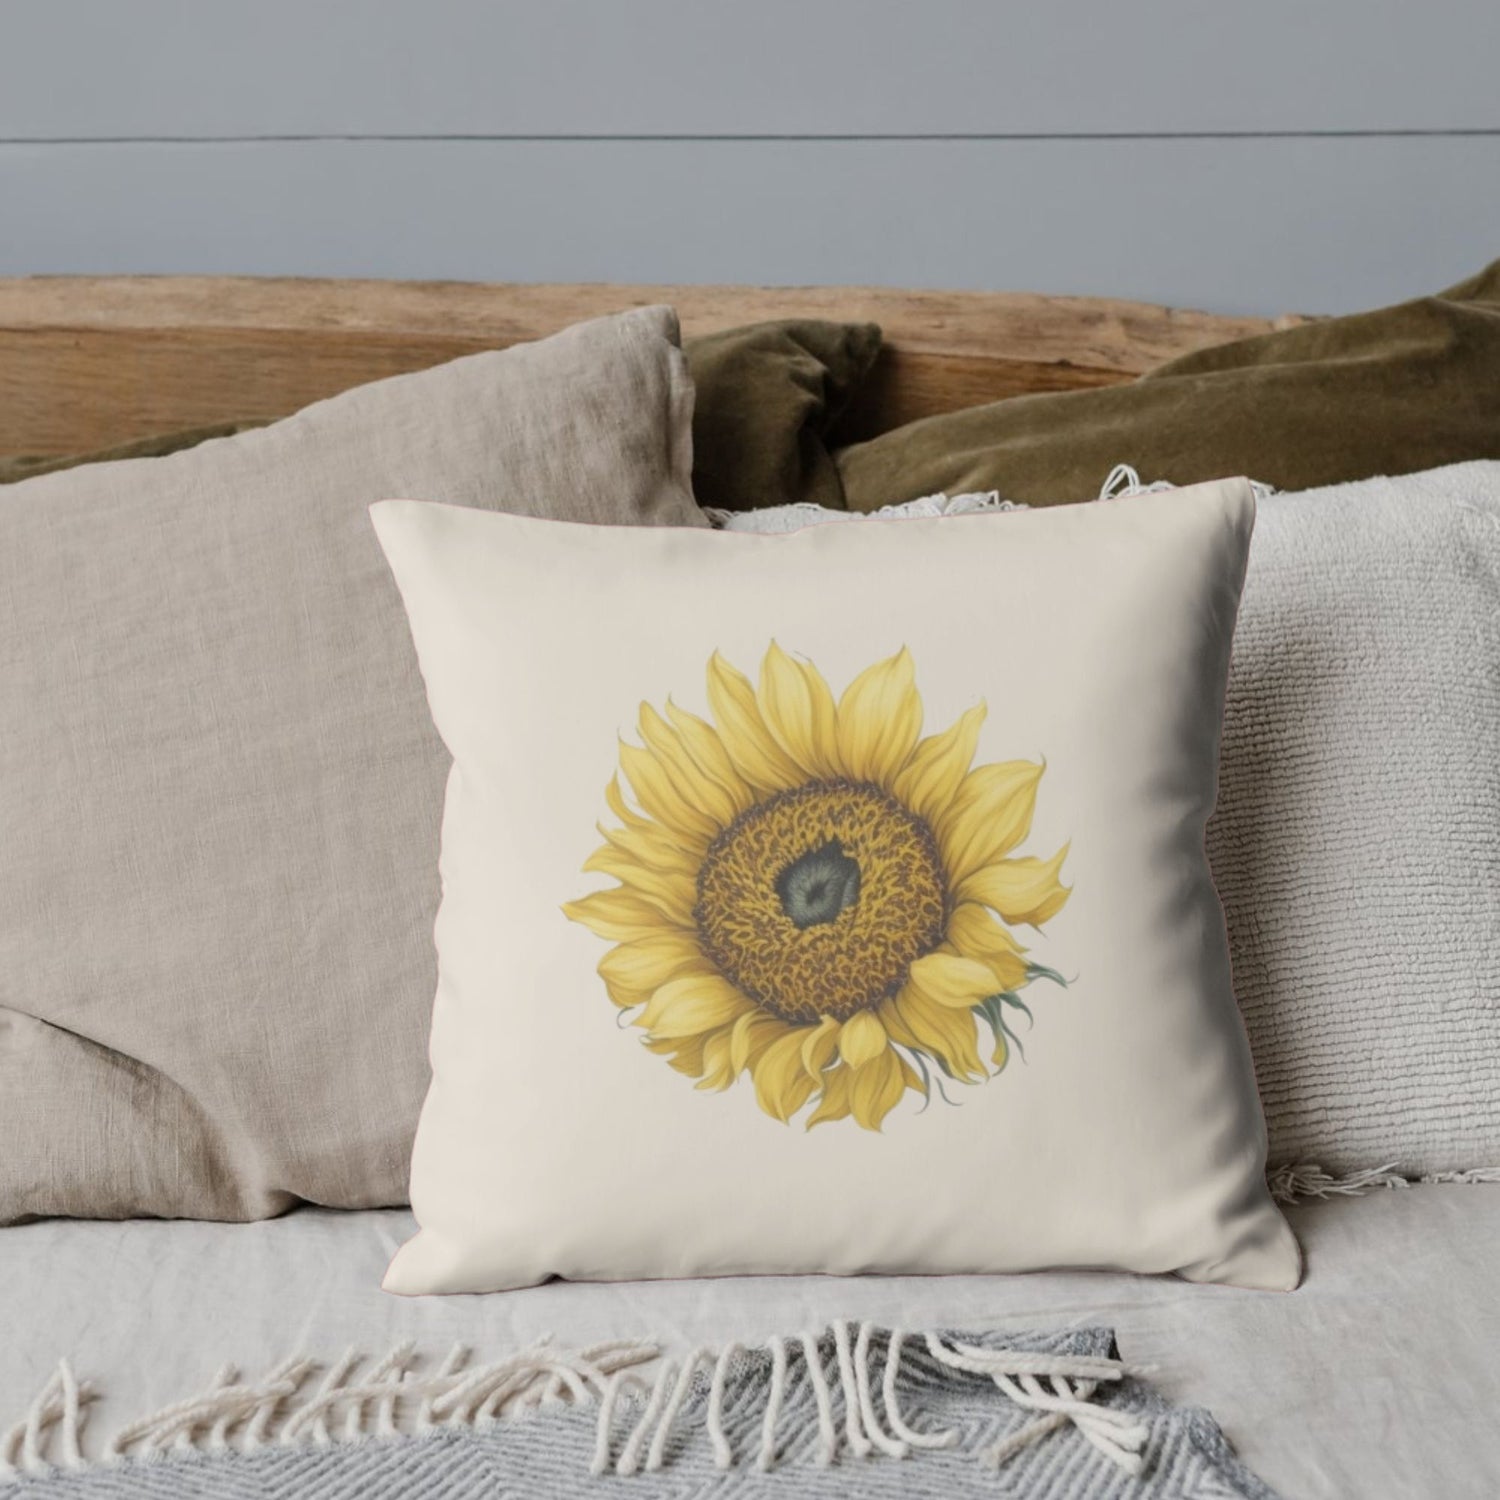 A cozy bed with neutral-colored pillows, featuring a standout throw pillow with a large, detailed sunflower illustration on a beige background.